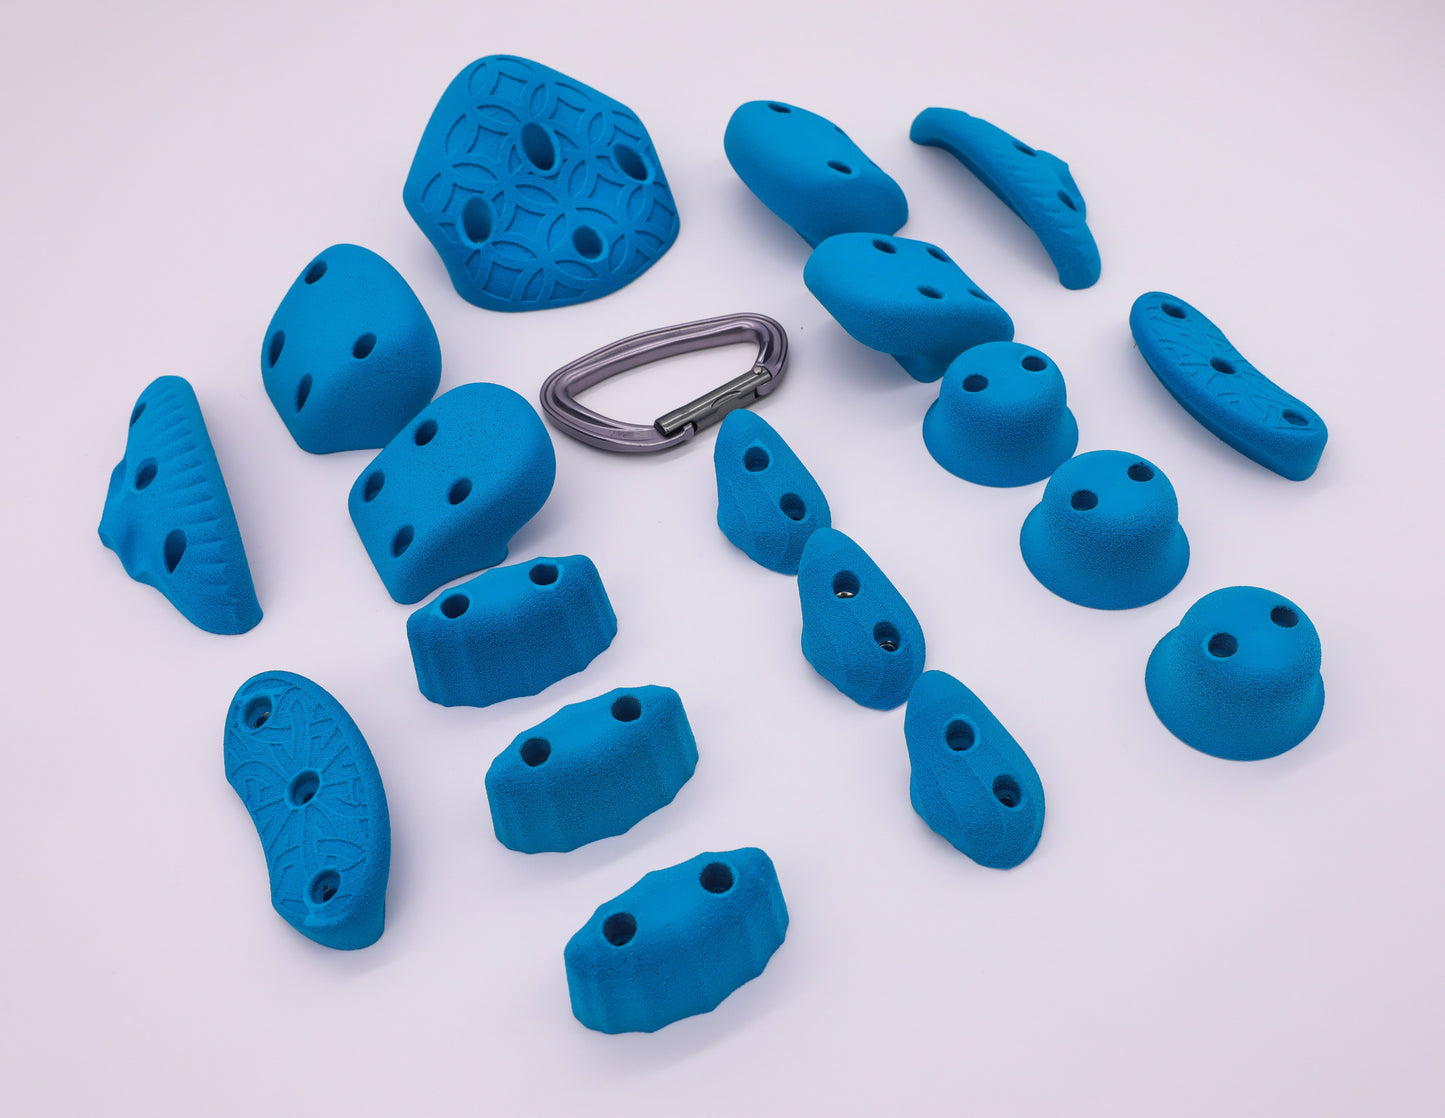 Beginners and Kids Deluxe Climbing Hold Set, Screw On Climbing Holds